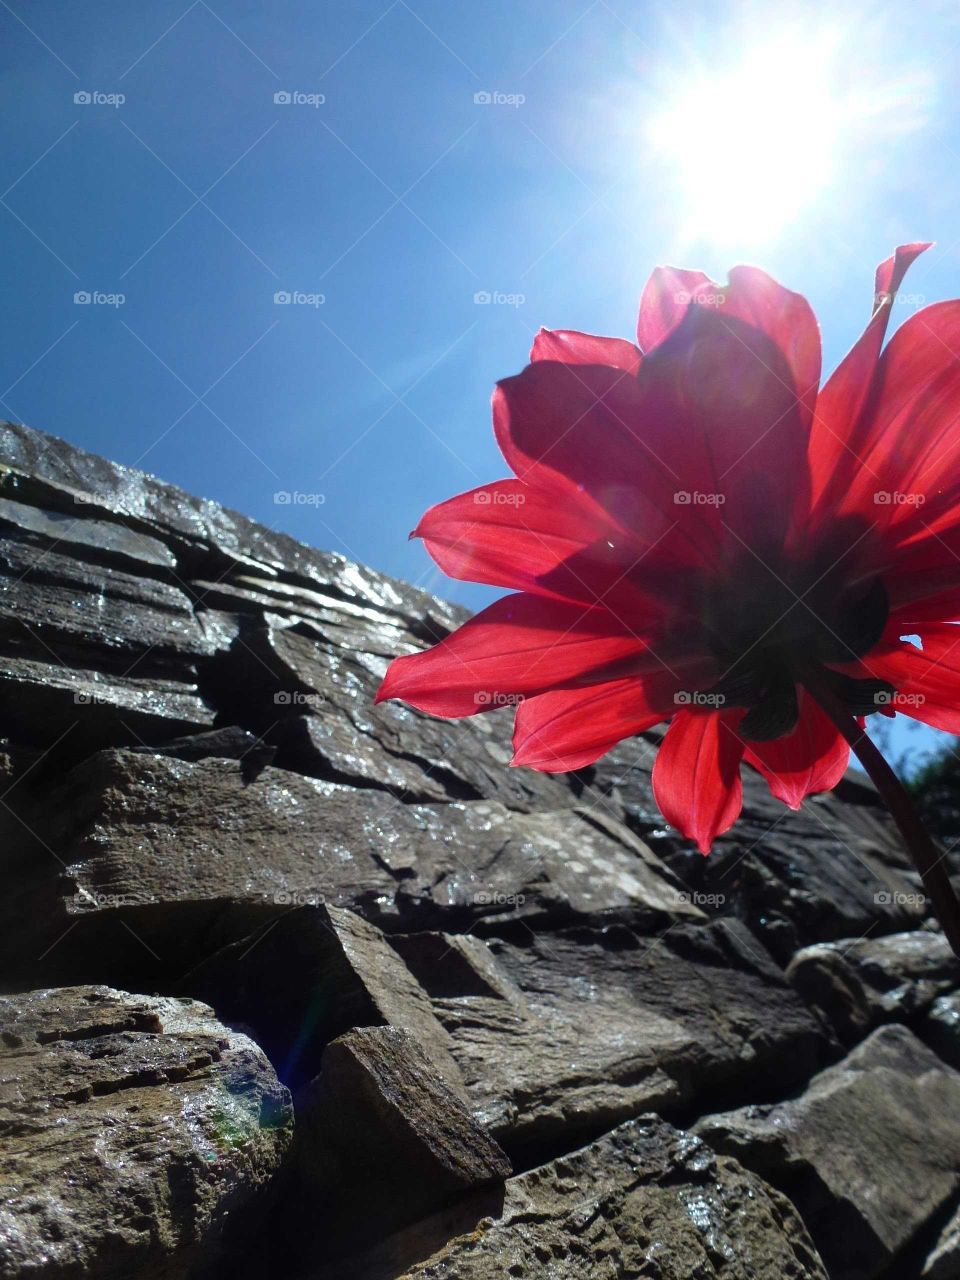 wall & Red Flower